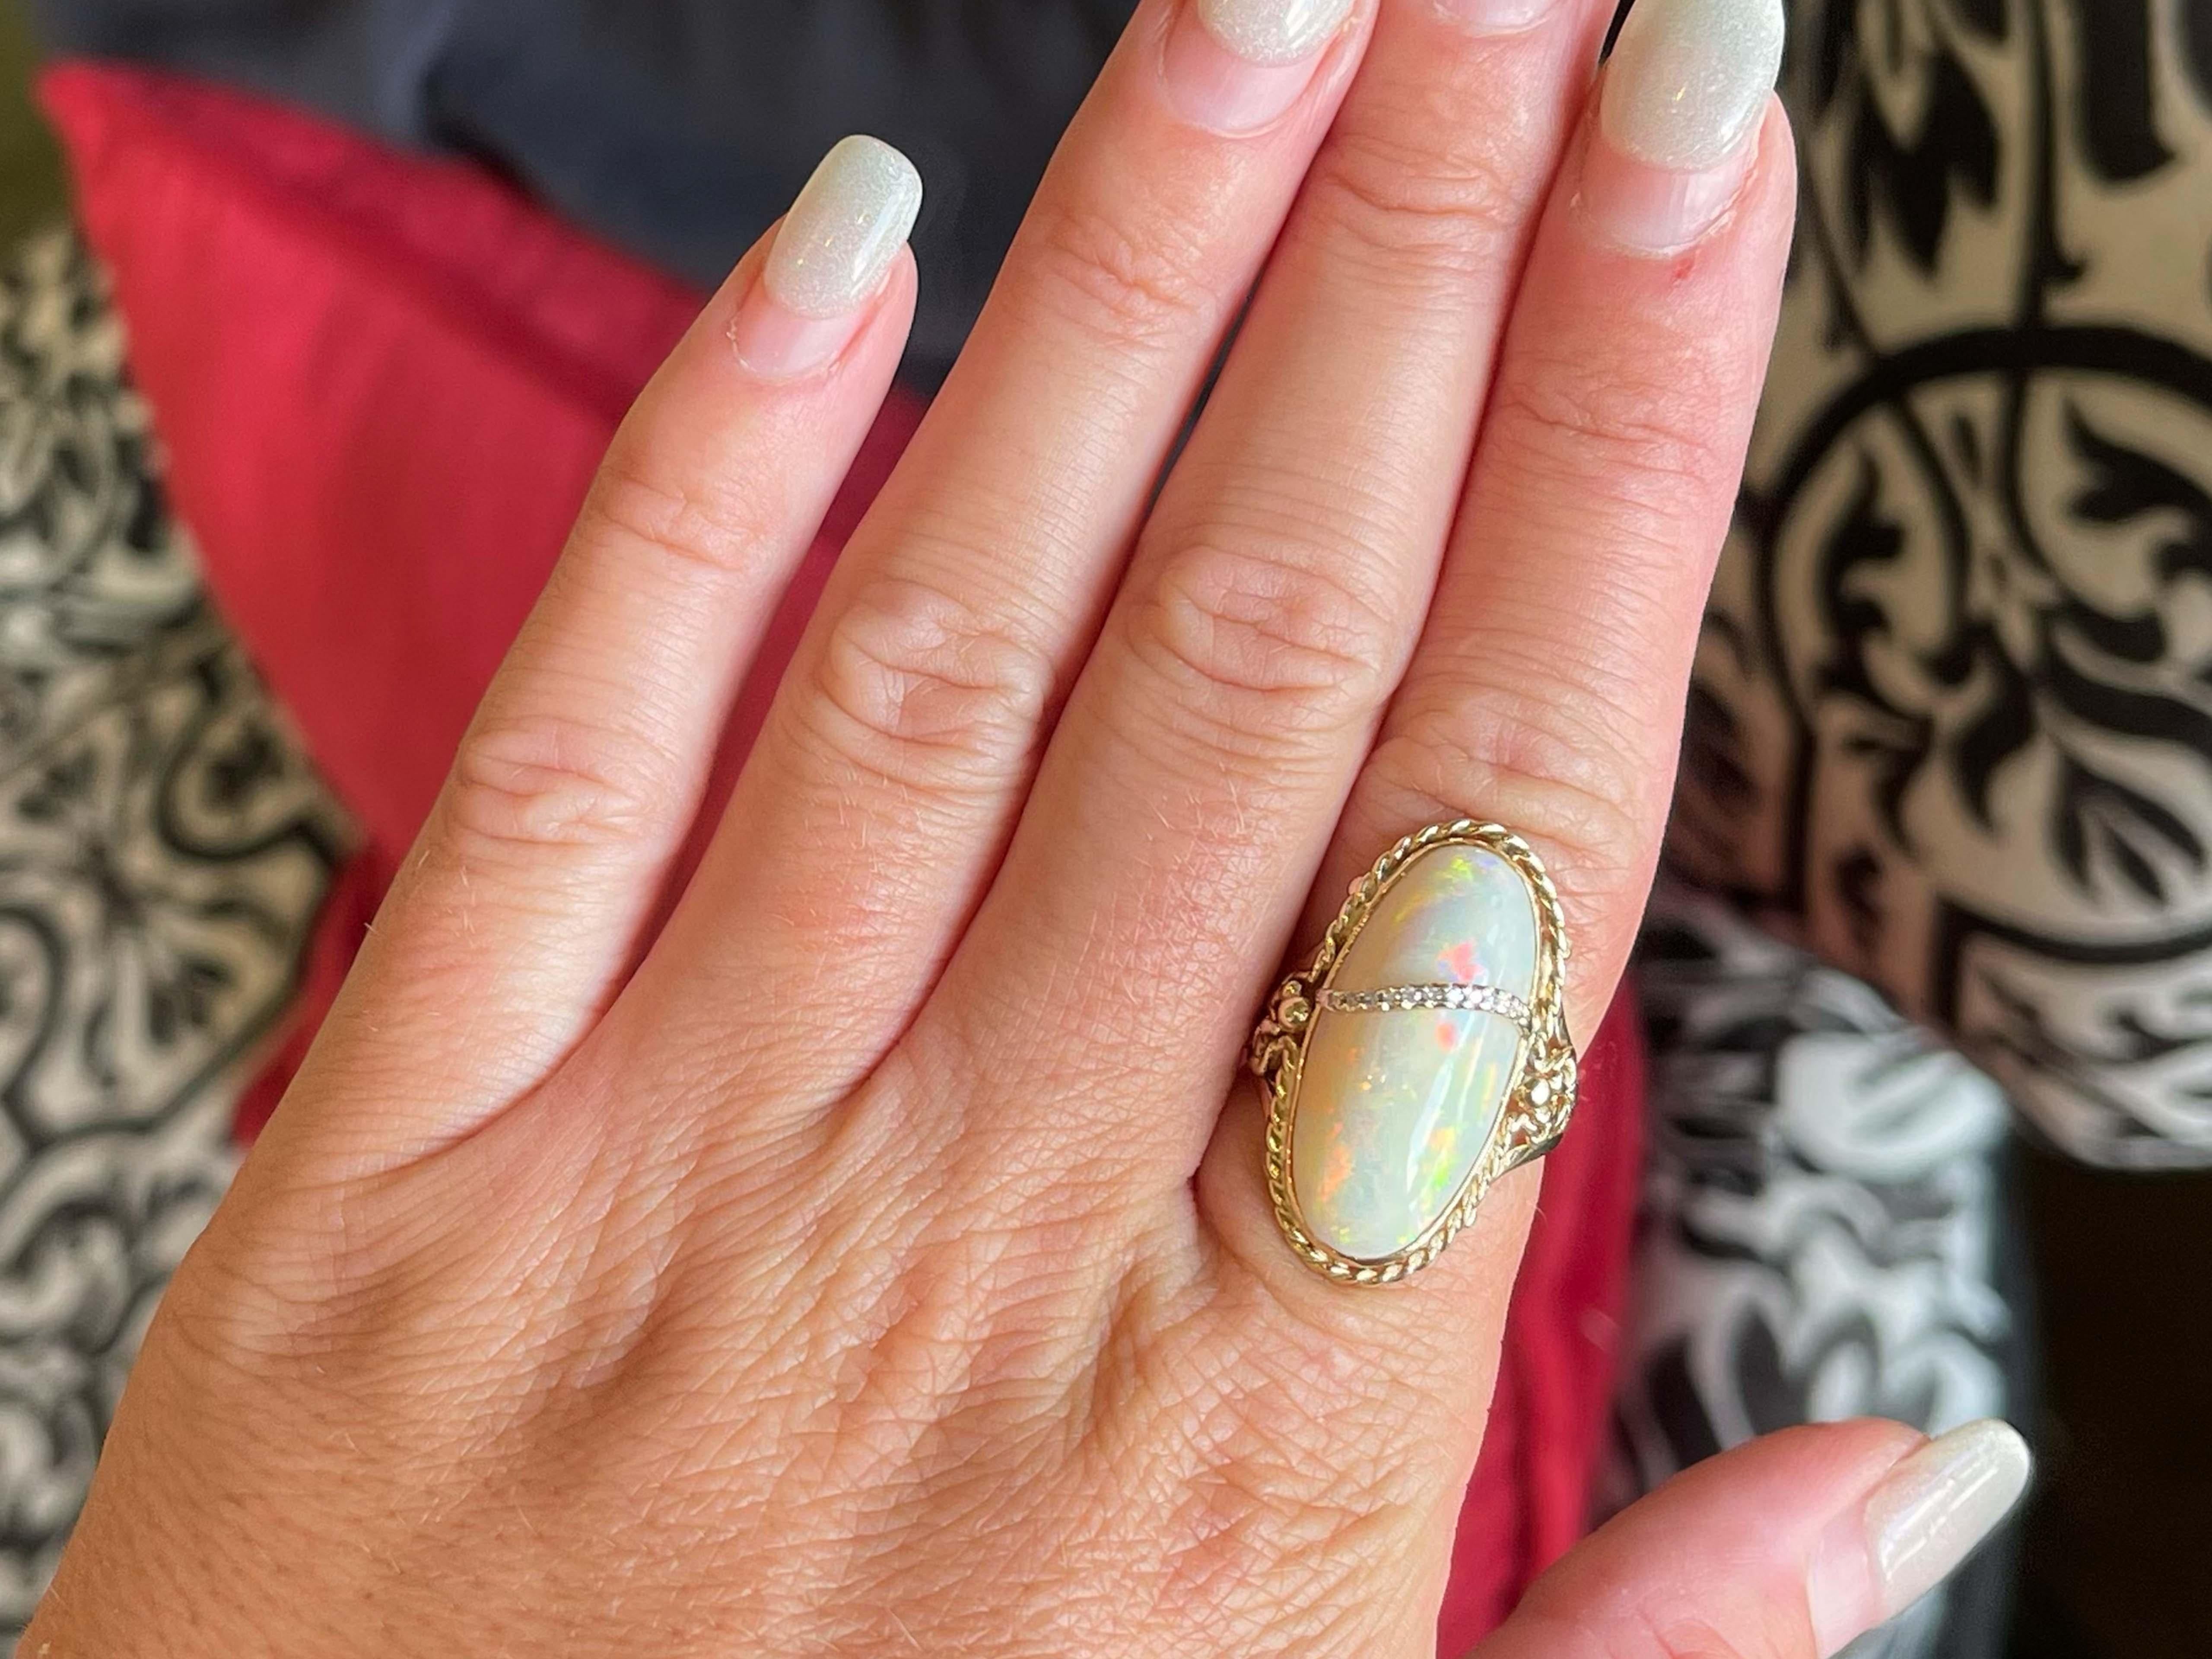 Item Specifications:

Metal: 14K Yellow Gold 

​​​Ring Size: 7

Total Weight: 6.1 Grams

Gemstone Specifications:

Center Gemstone: Opal

Gemstone Measurements: ~24.5 mm x 11.9 mm x 5.10 mm

Gemstone Carat Weight: ~8.4 carats

Diamond Count: